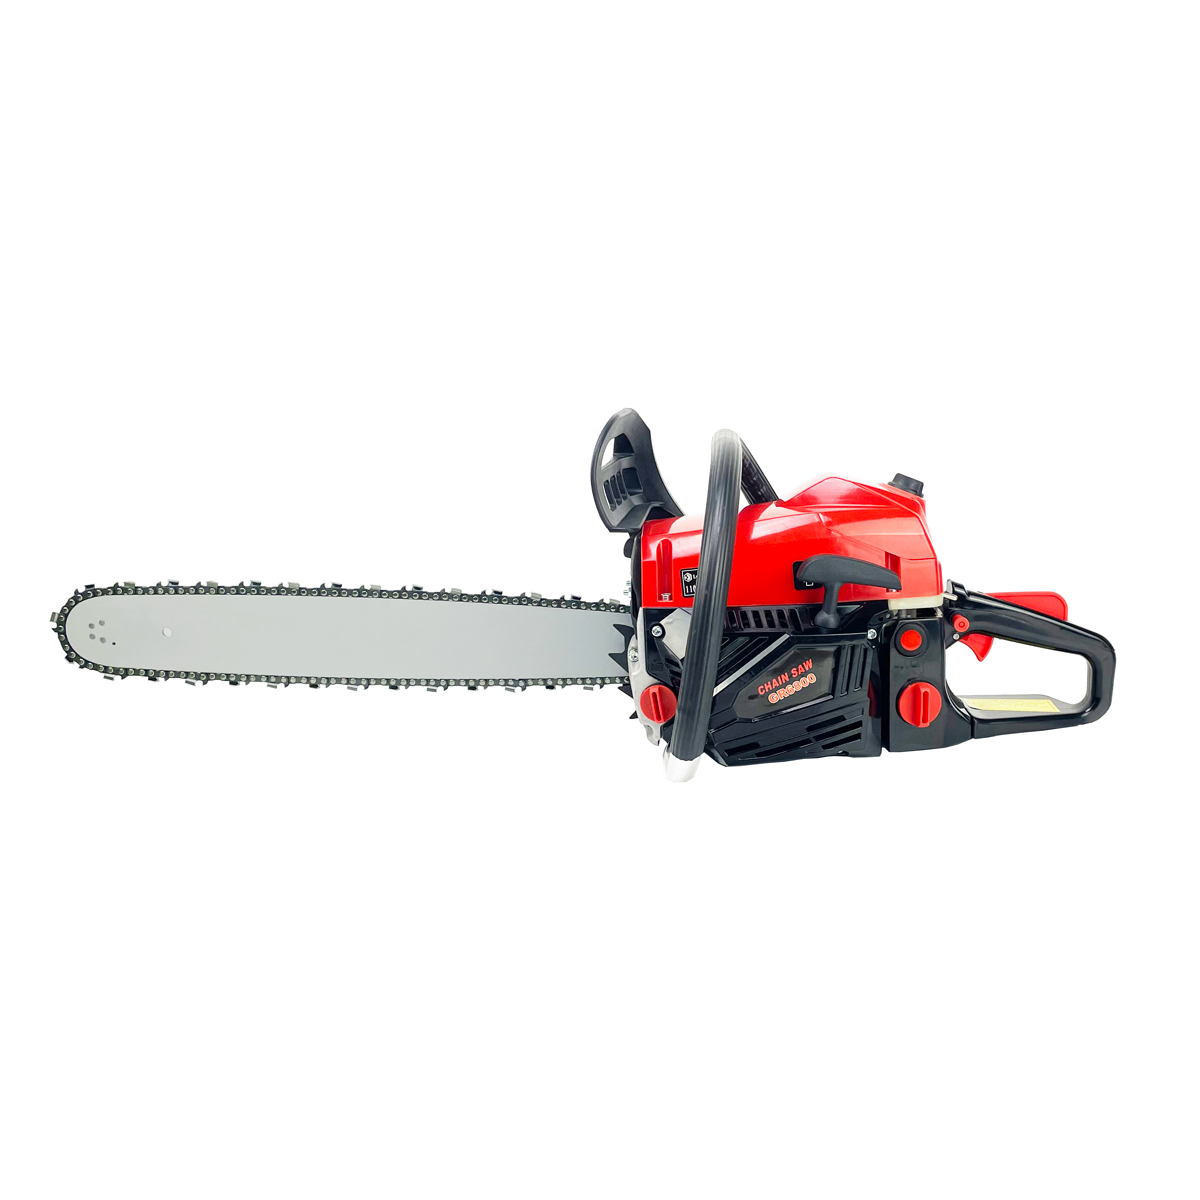 6500 chain saw(easy starter)